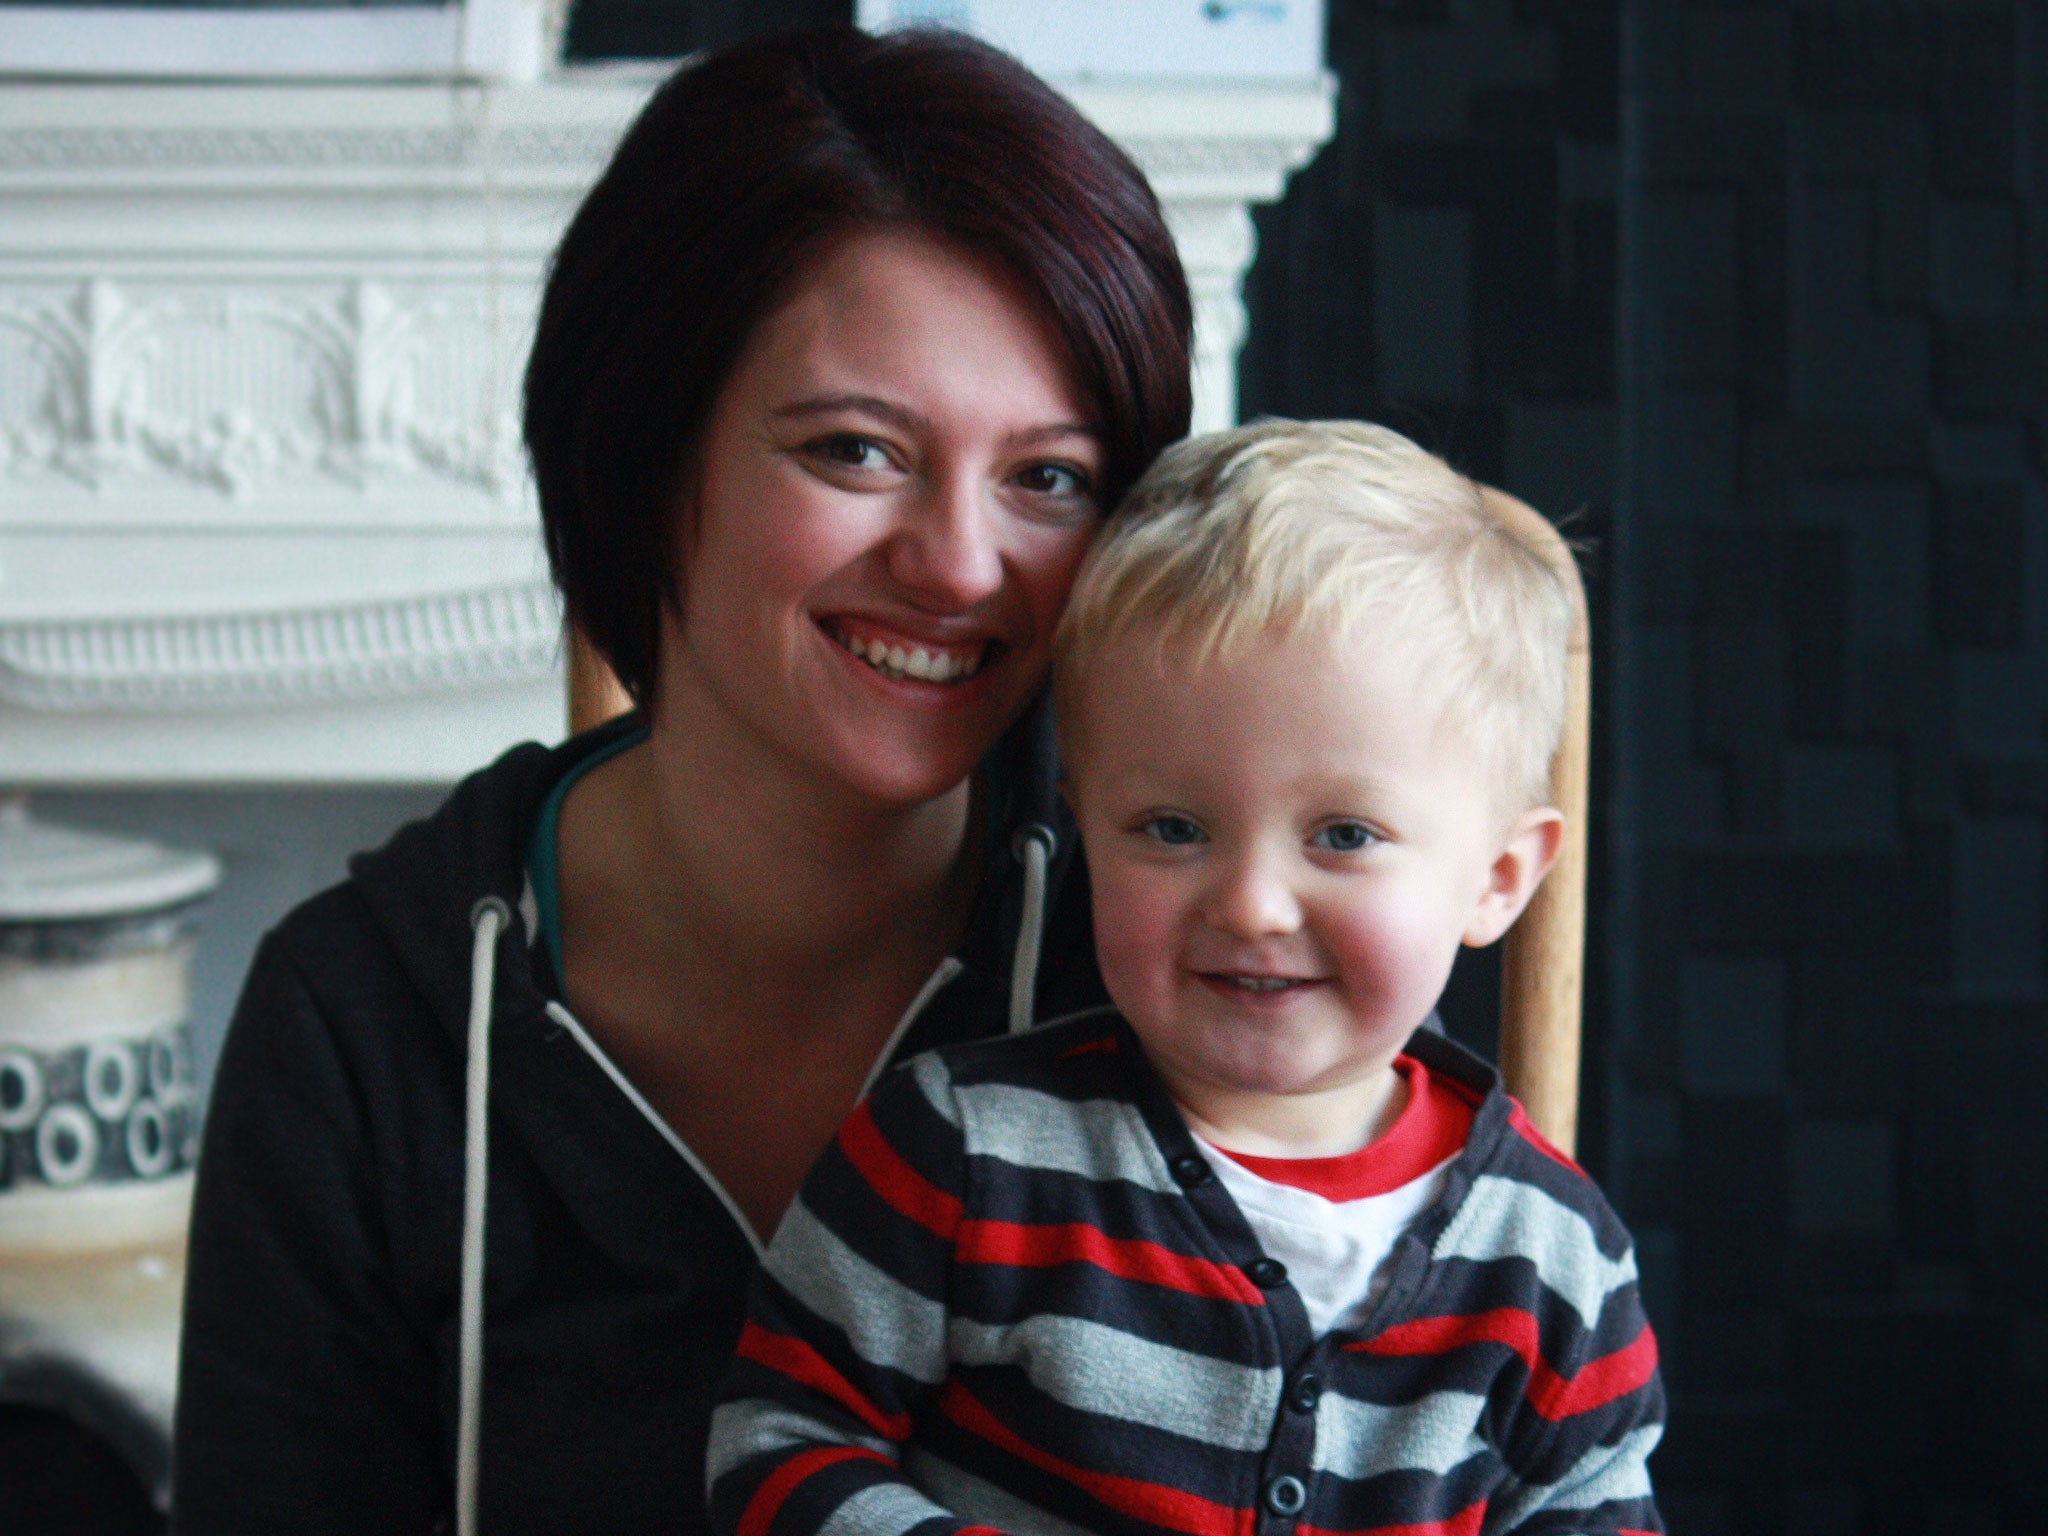 Jack Monroe has created recipes to feed herself and her son, Johnny, on £10 a week